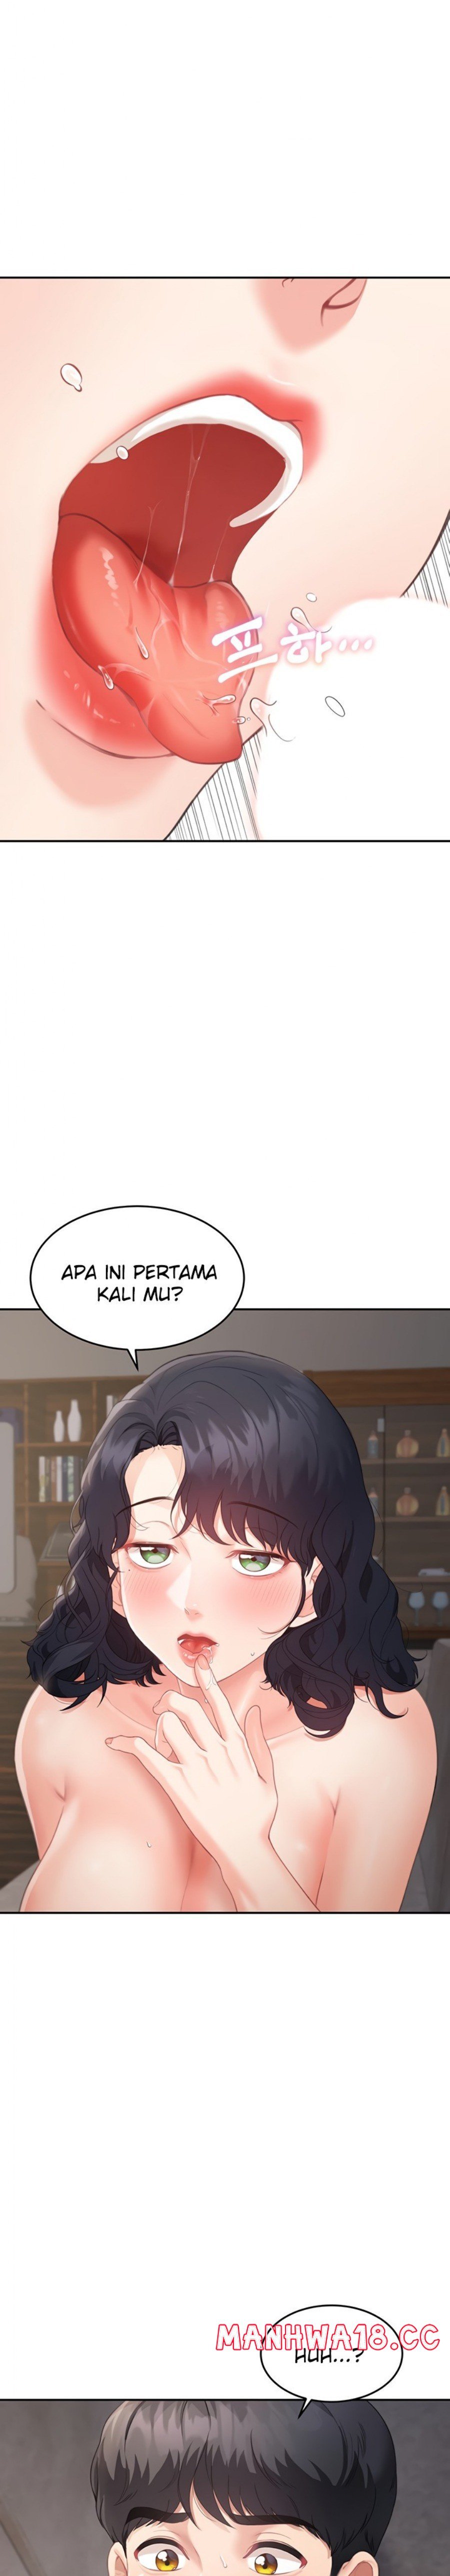 is-it-your-mother-or-sister-raw-chap-3-14